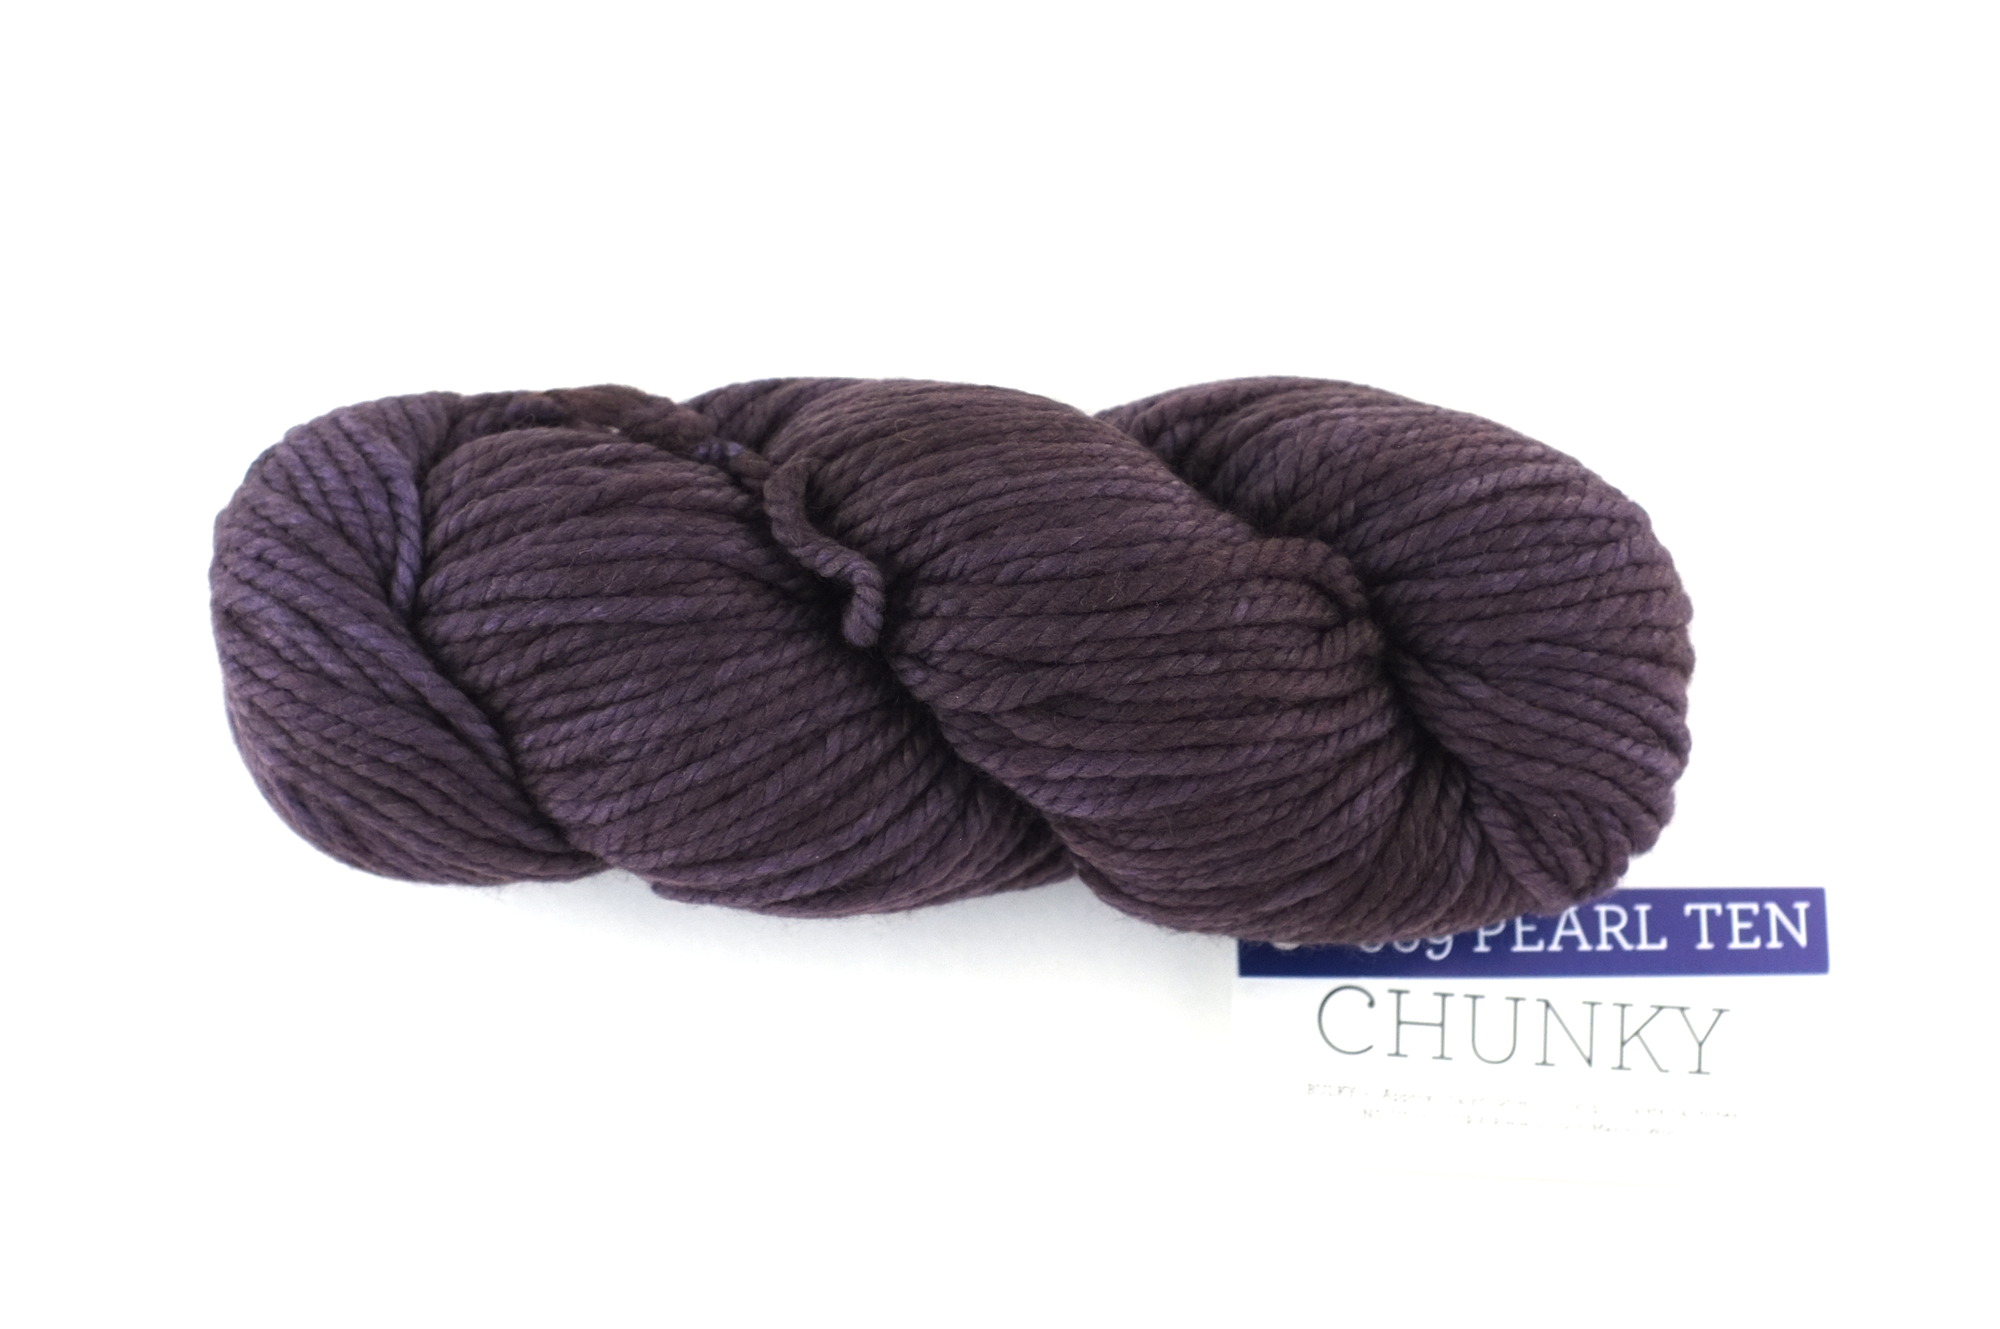 Malabrigo Chunky in color Pearl Ten, Bulky Weight Merino Wool Knitting  Yarn, deepest gray-eggplant, #069 Red Beauty Textiles